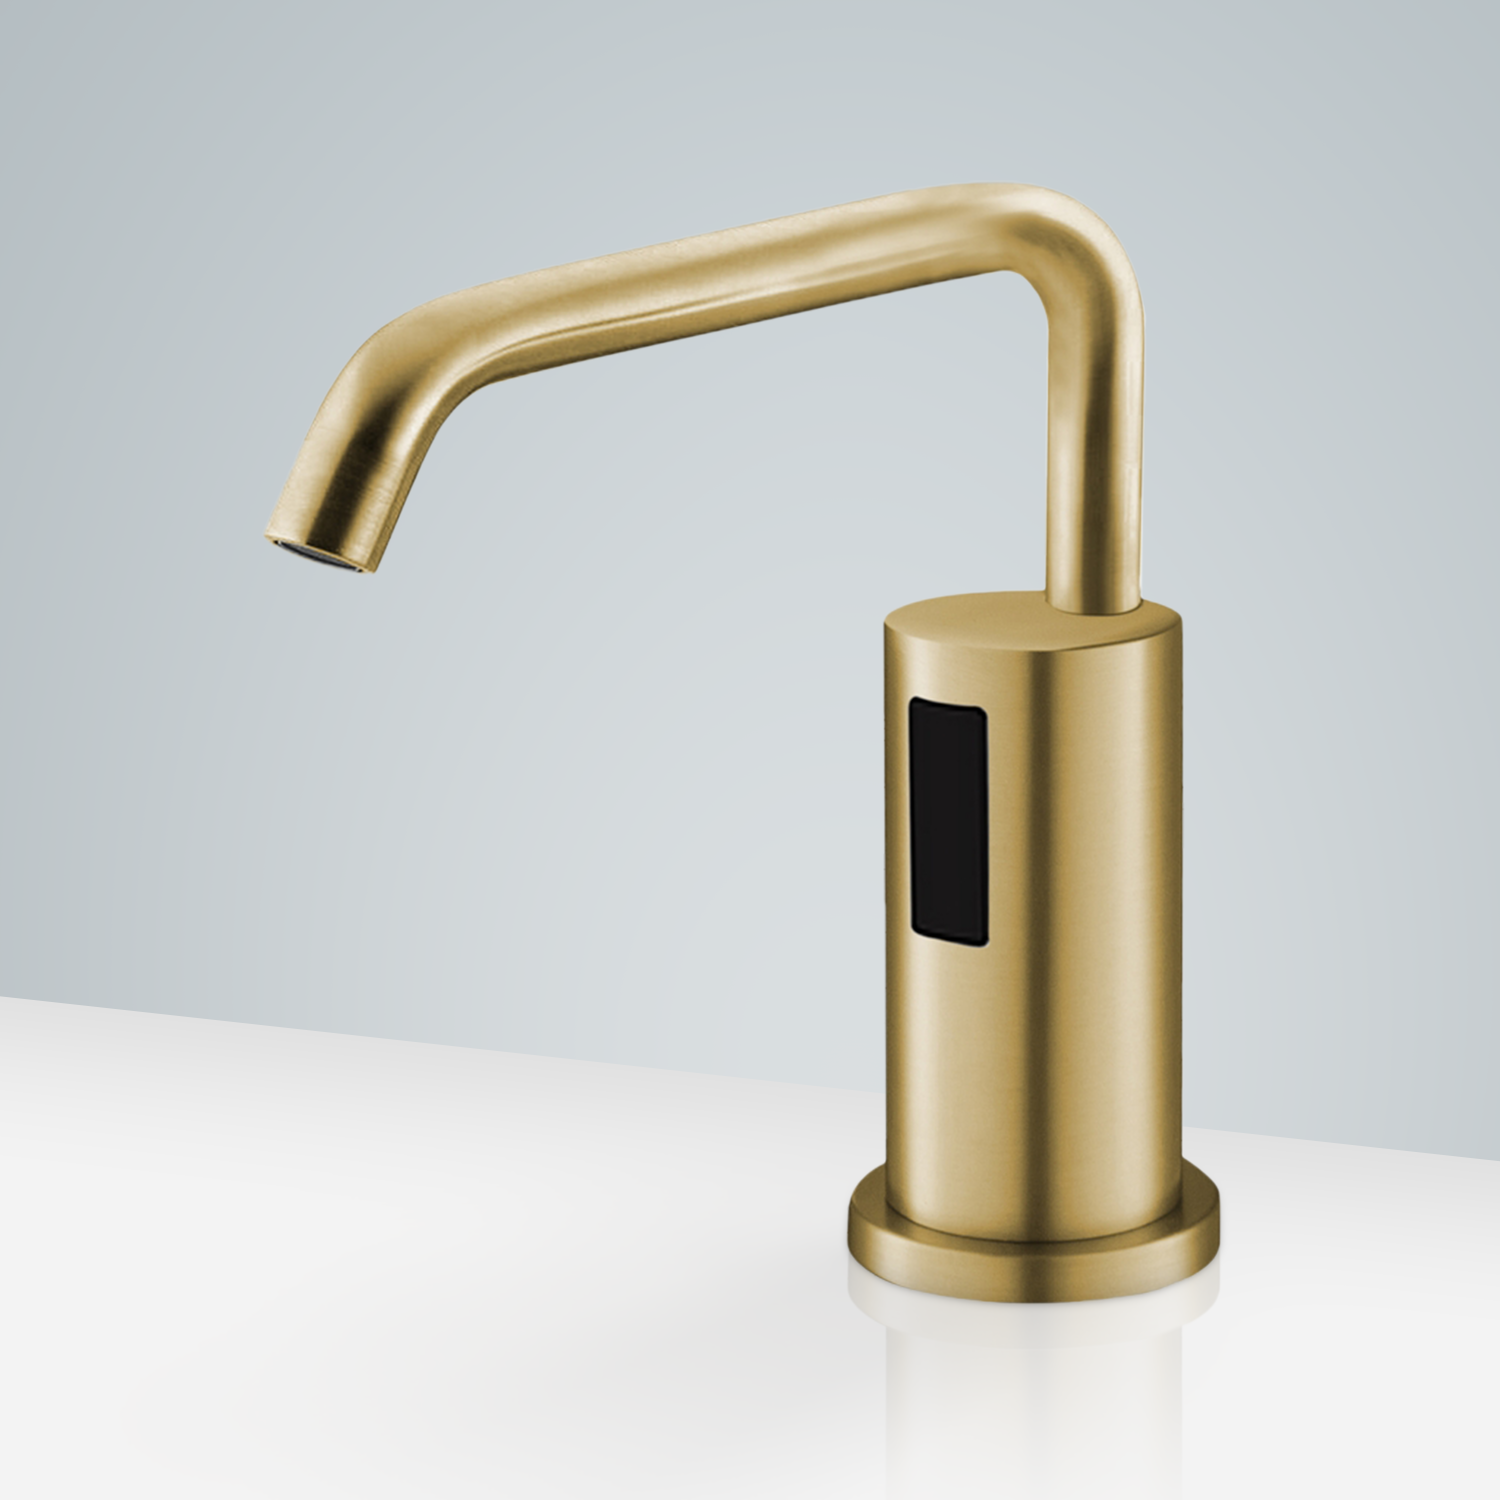 Fontana Vienna Automatic Sensor Deck Mounted Commercial Liquid Foam Soap Dispenser. eye-catching Design - Durable made Ideal for Commercial Applications